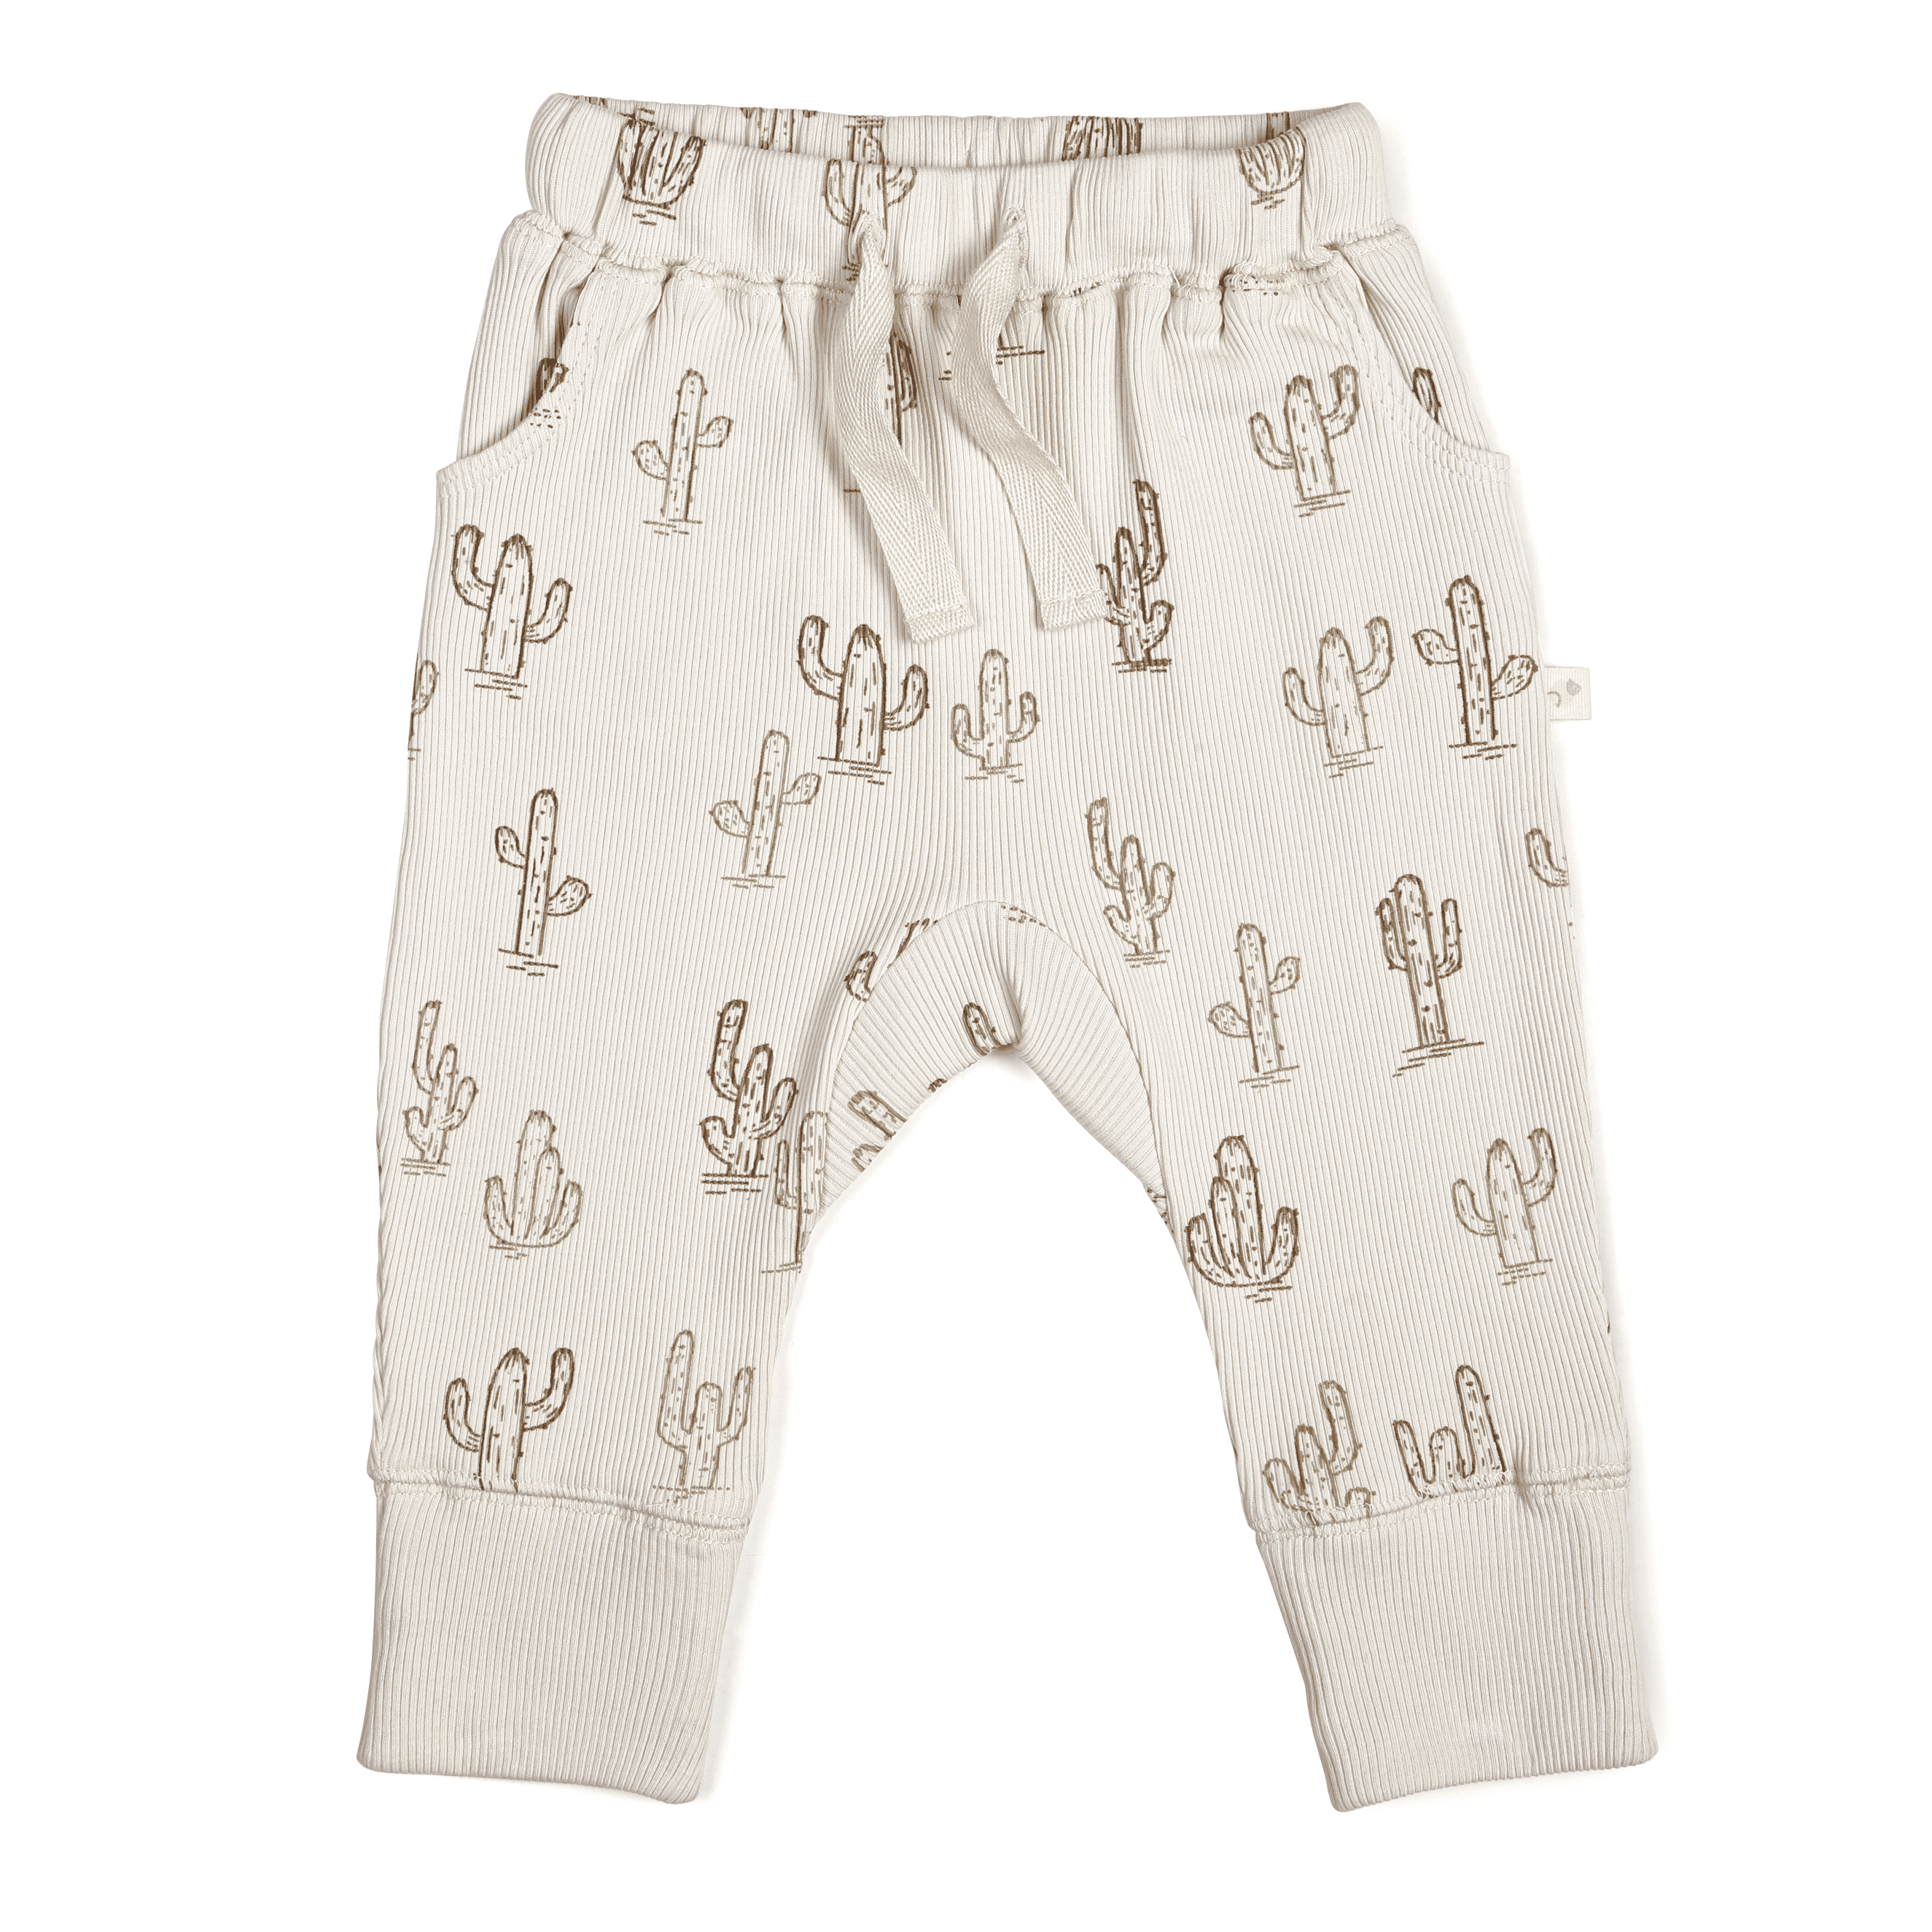 Toddler Organic Harem Pants - Cactus in a light beige color, adorned with a pattern of various cactus illustrations. The pants have a drawstring waist and ribbed cuffs by Makemake Organics.